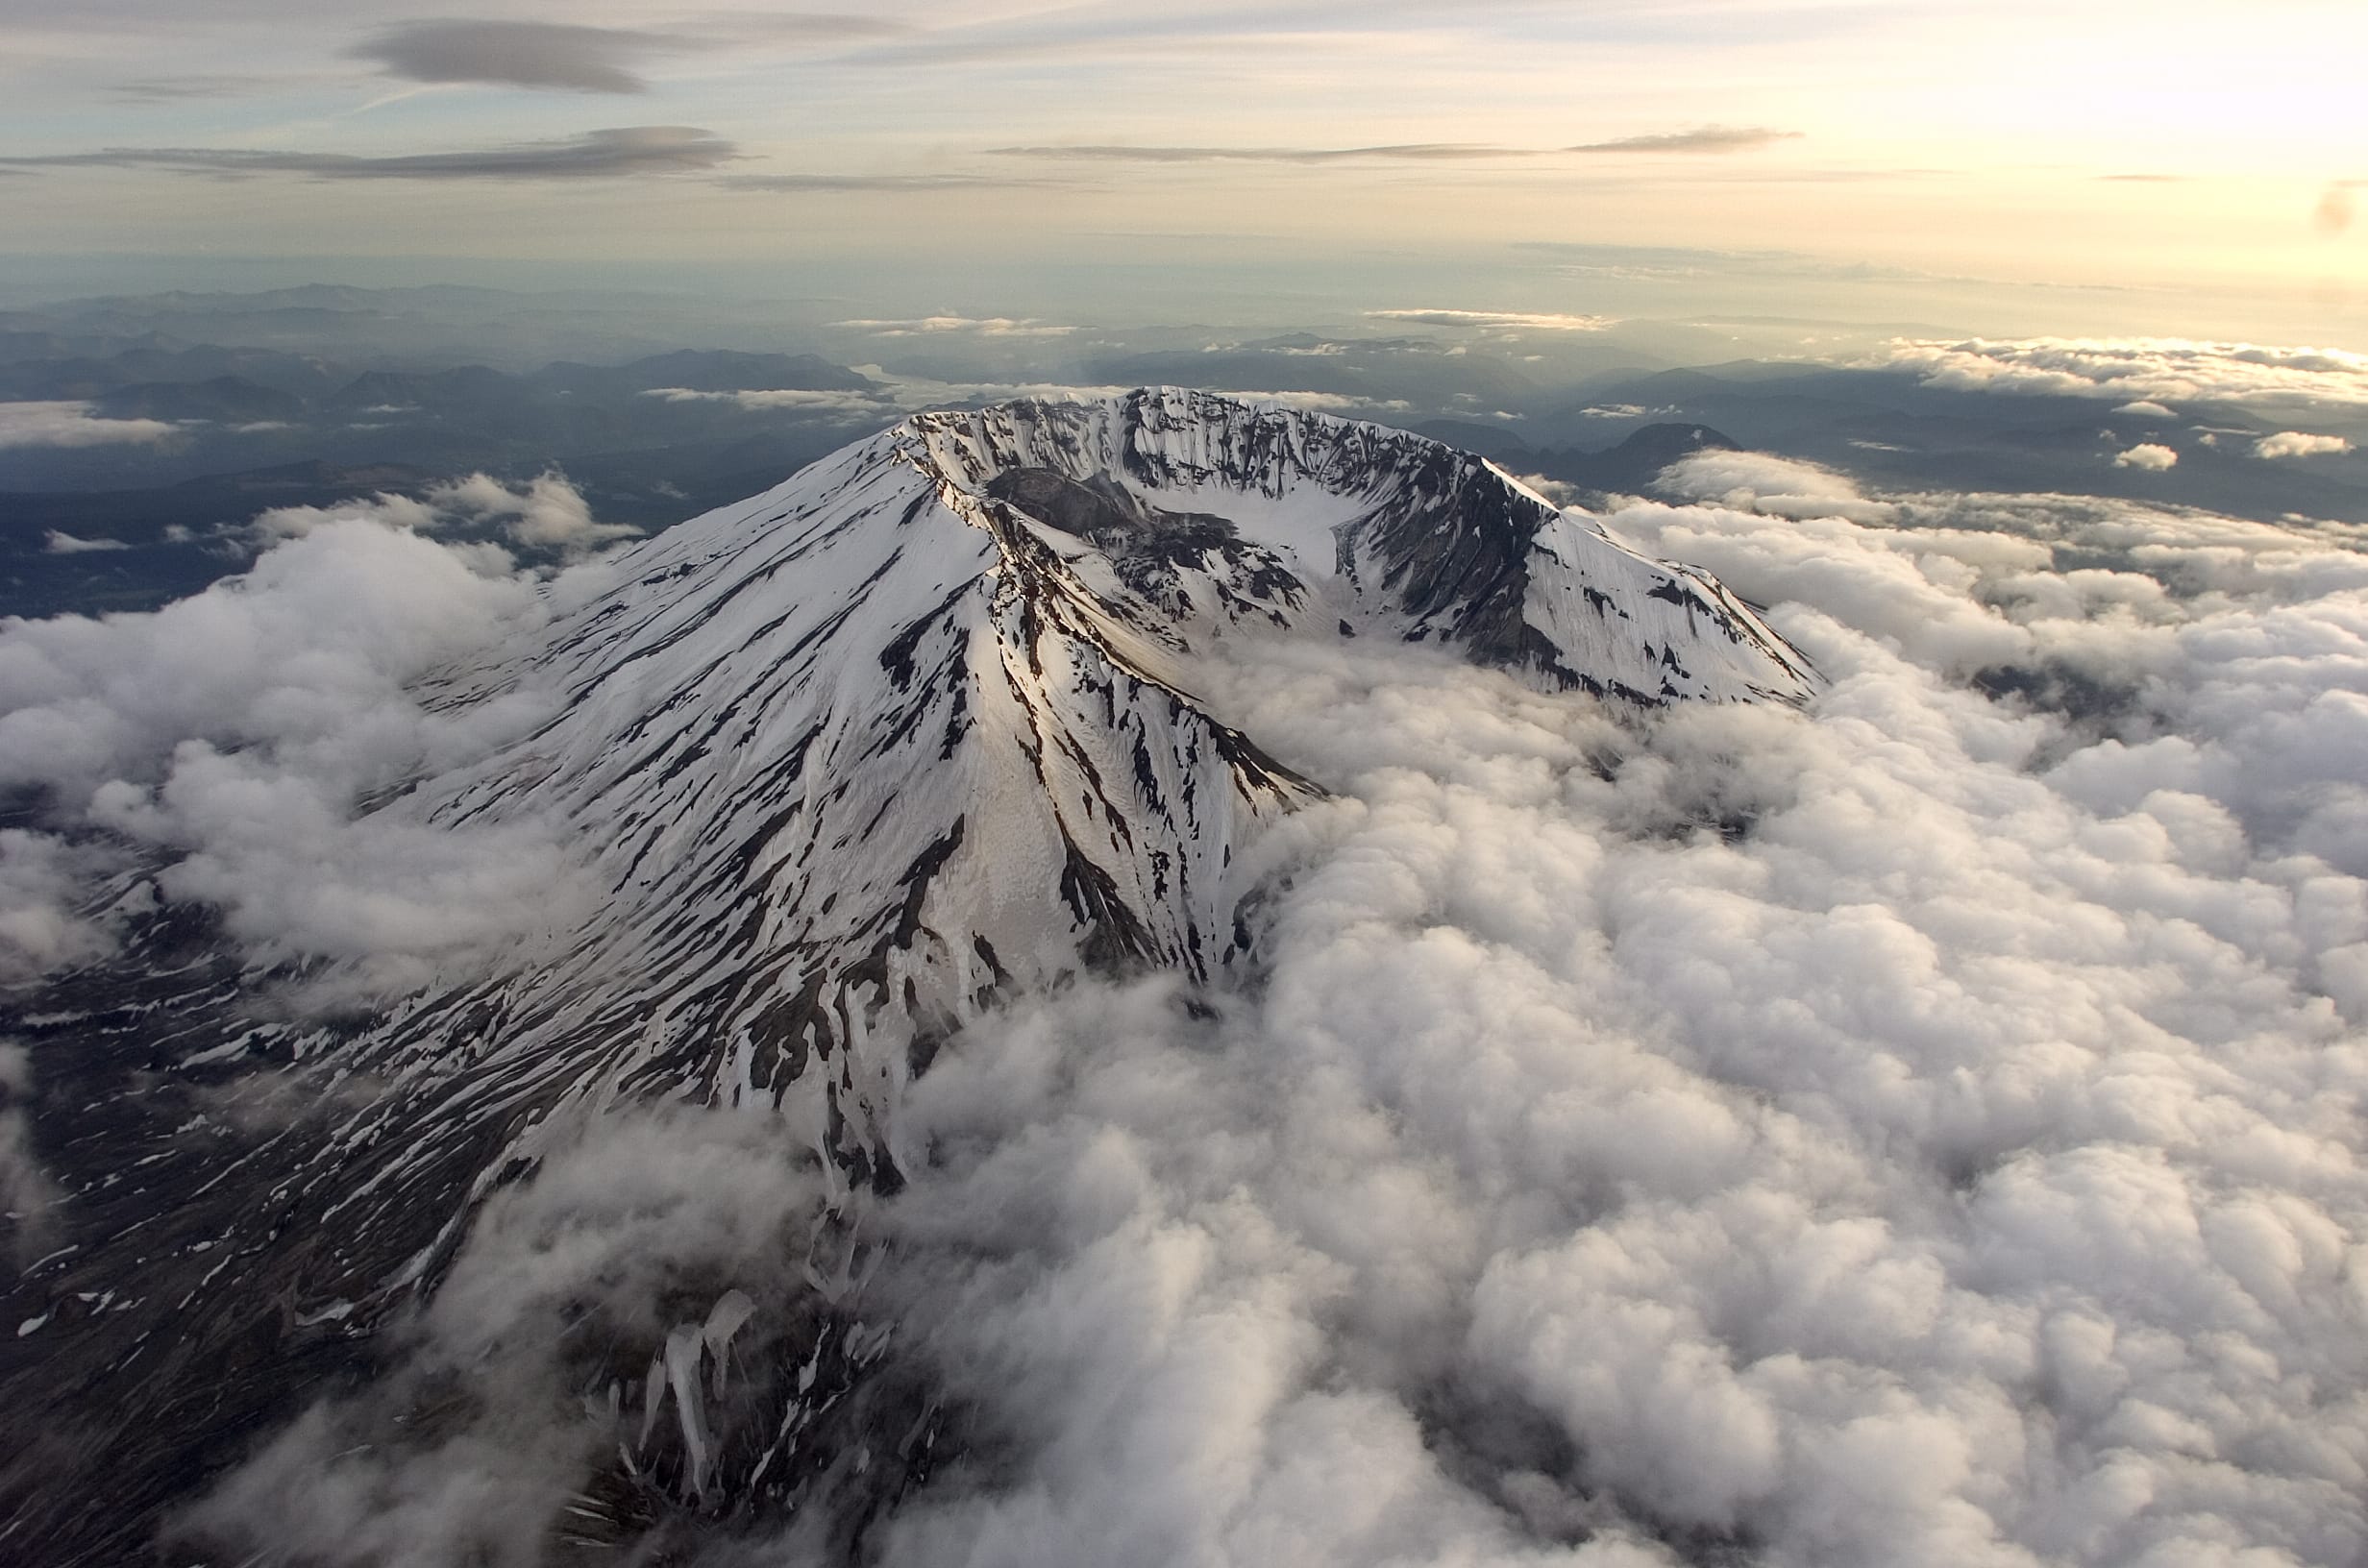 Mount St. Helens pictured in this aerial view during the evening May 12, 2005.